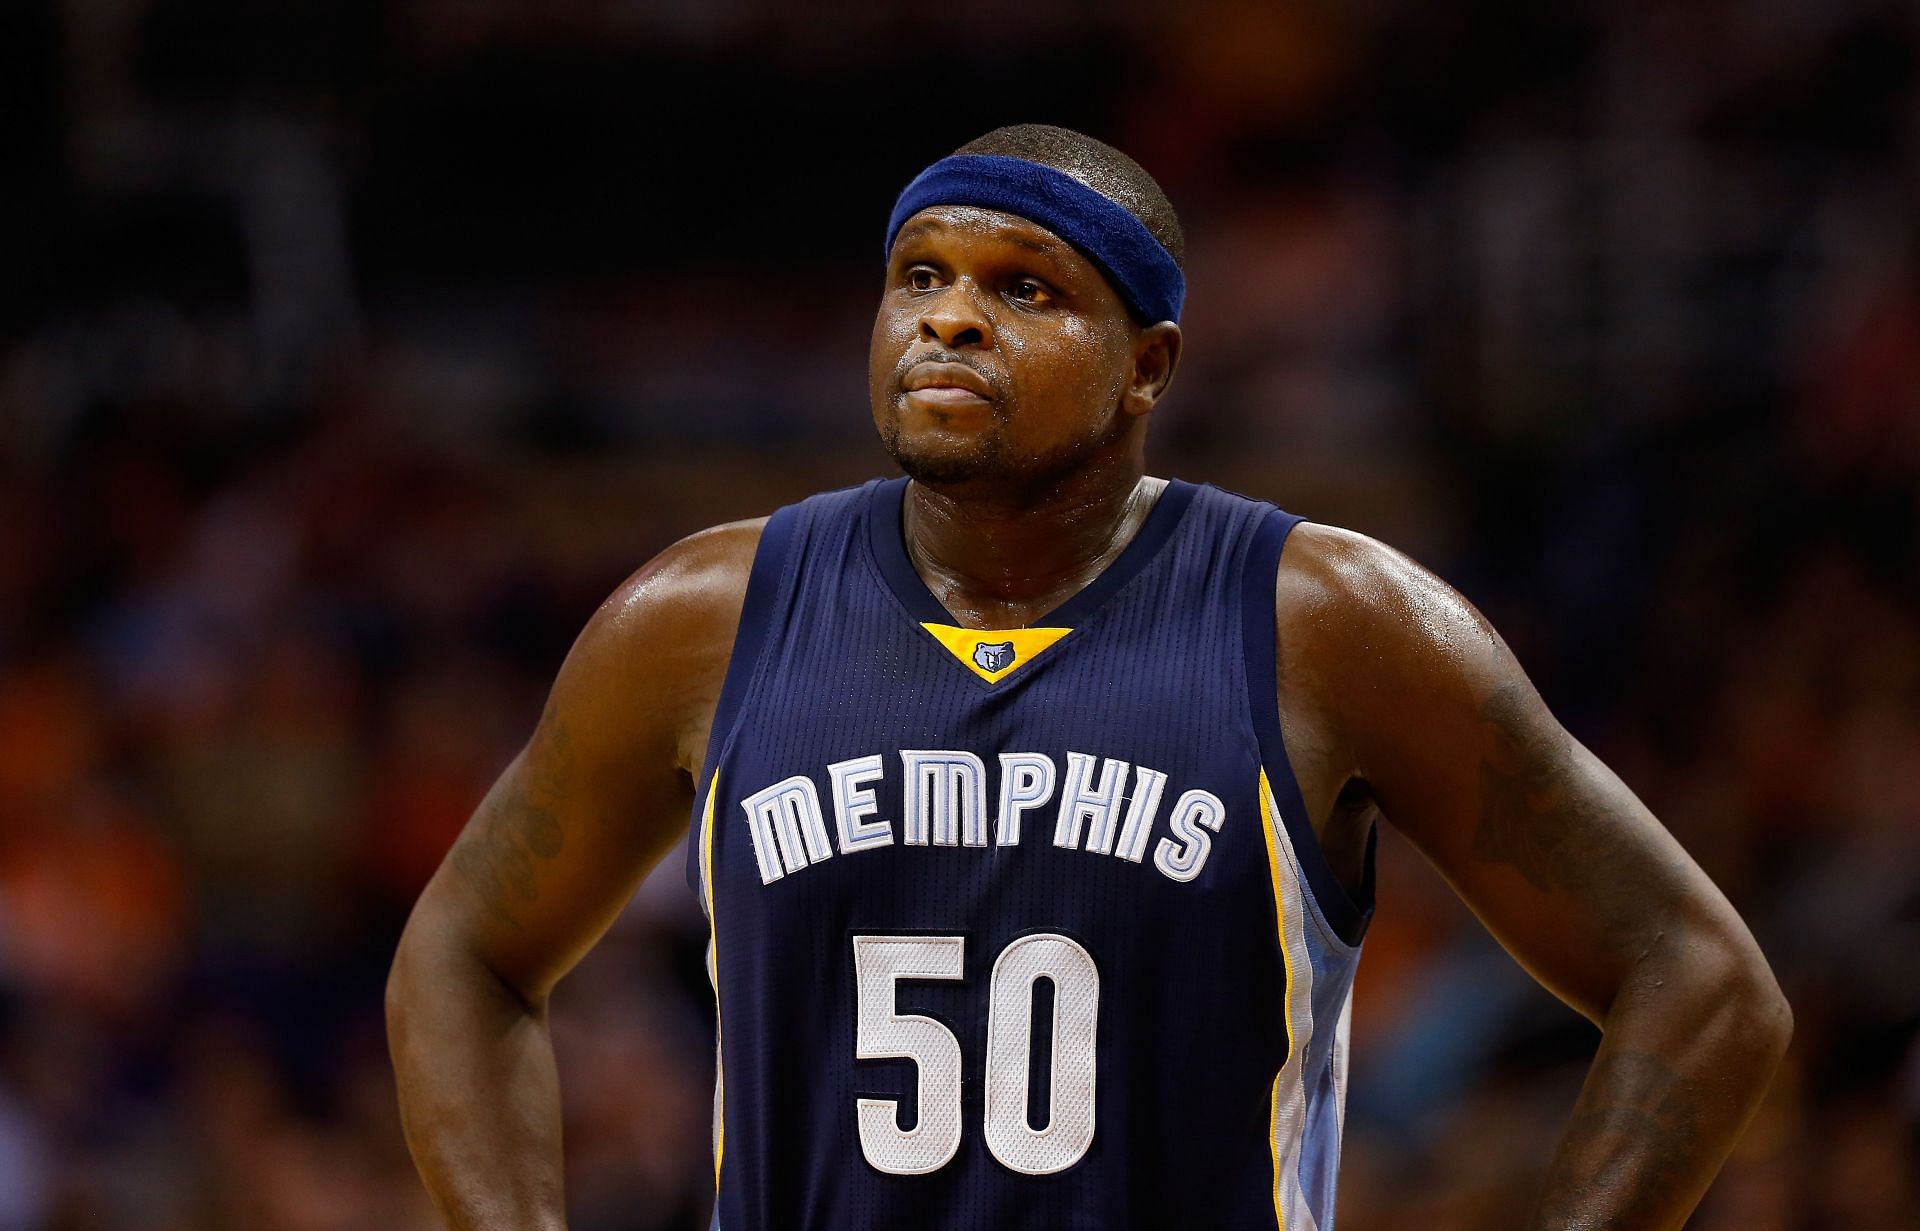 Zach Randolph #50 of the Memphis Grizzlies during the NBA game against the Phoenix Suns at US Airways Center on November 5, 2014 in Phoenix, Arizona. The Grizzlies defeated the Suns 102-91.